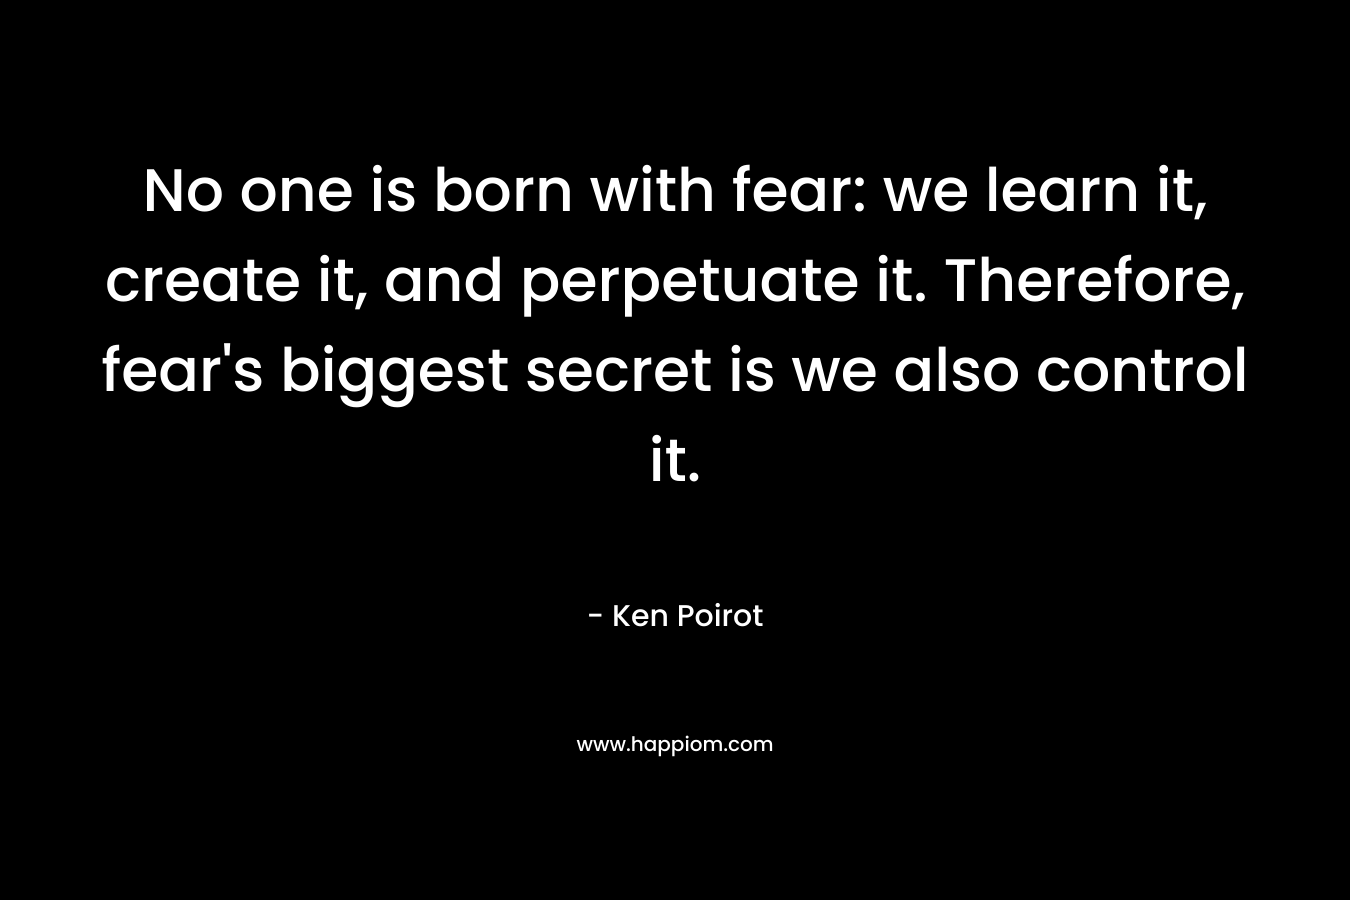 No one is born with fear: we learn it, create it, and perpetuate it. Therefore, fear's biggest secret is we also control it.